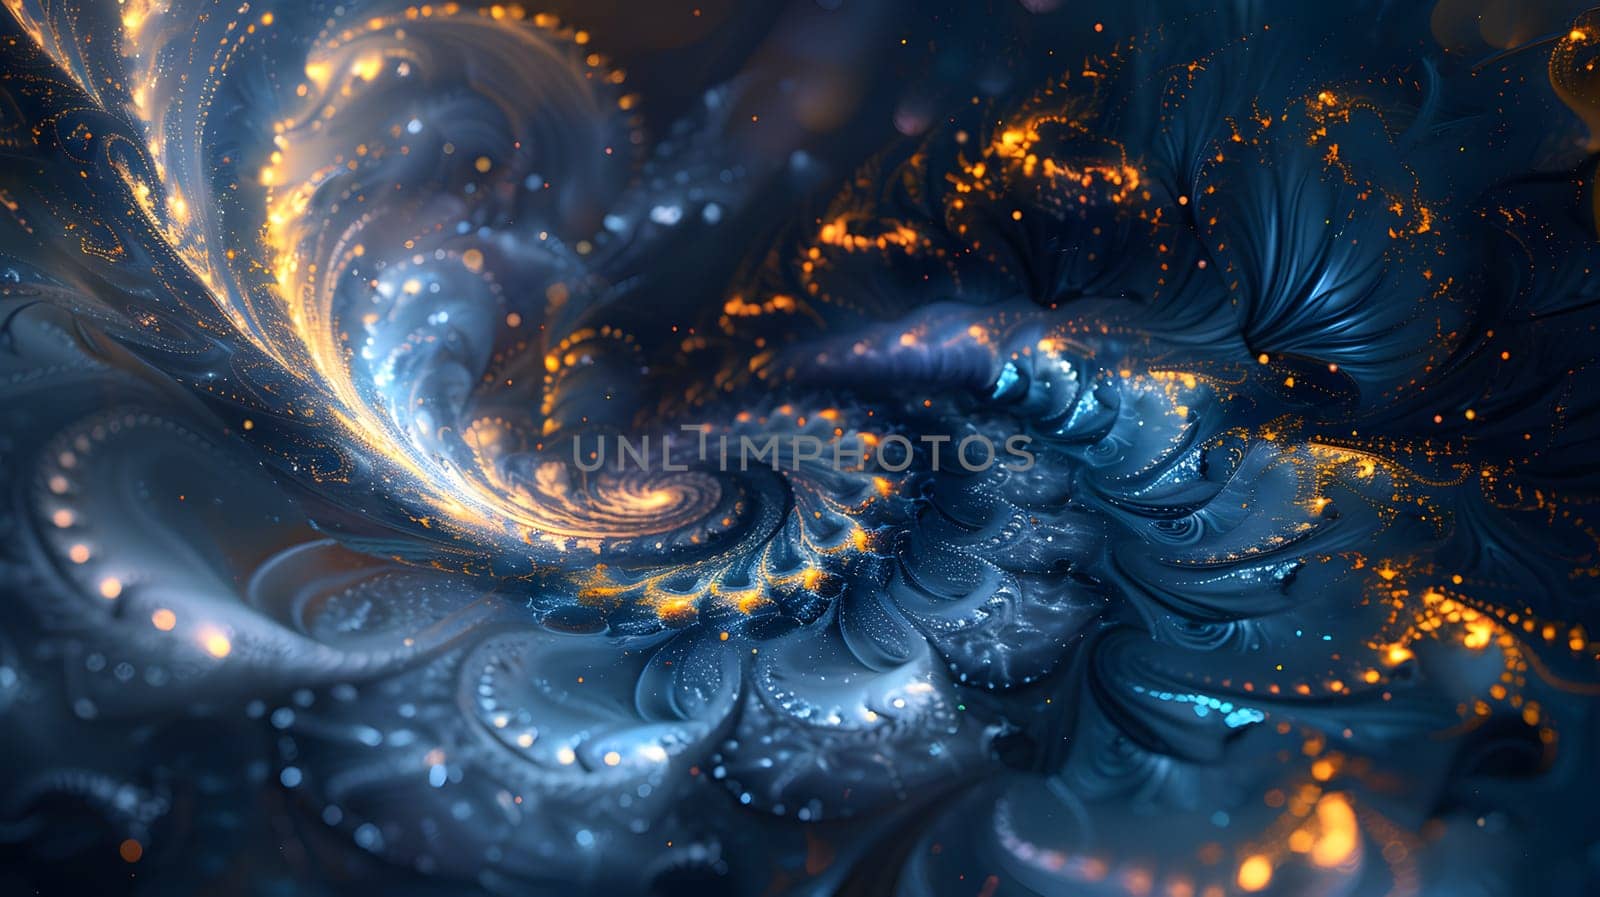 A mesmerizing painting of a swirling pattern in electric blue and orange colors, resembling a cosmic event in the dark space, with symmetrical and liquidlike qualities